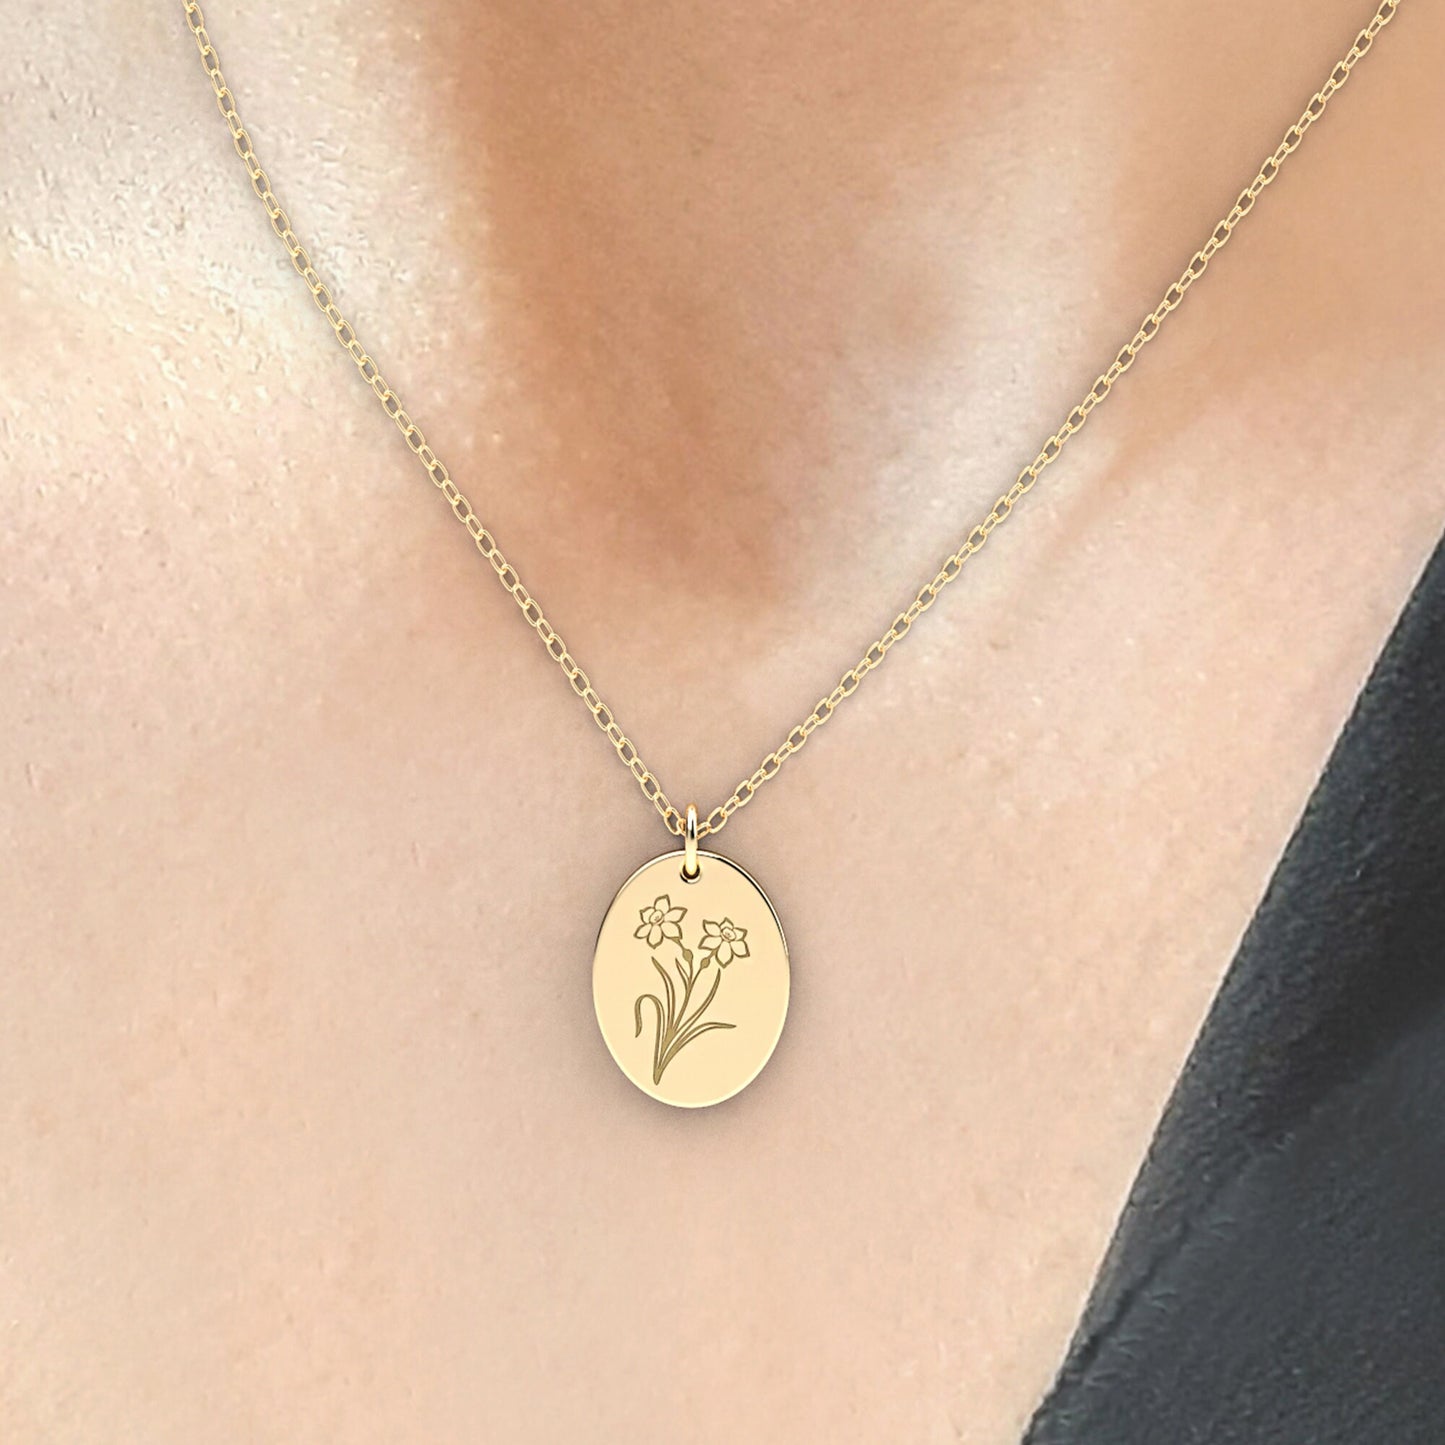 Oval Flower Pendant Necklace  • Real 14k gold necklace  • Custom Engraved Birth Flower Necklace • Personalized Birtday Gifts for her